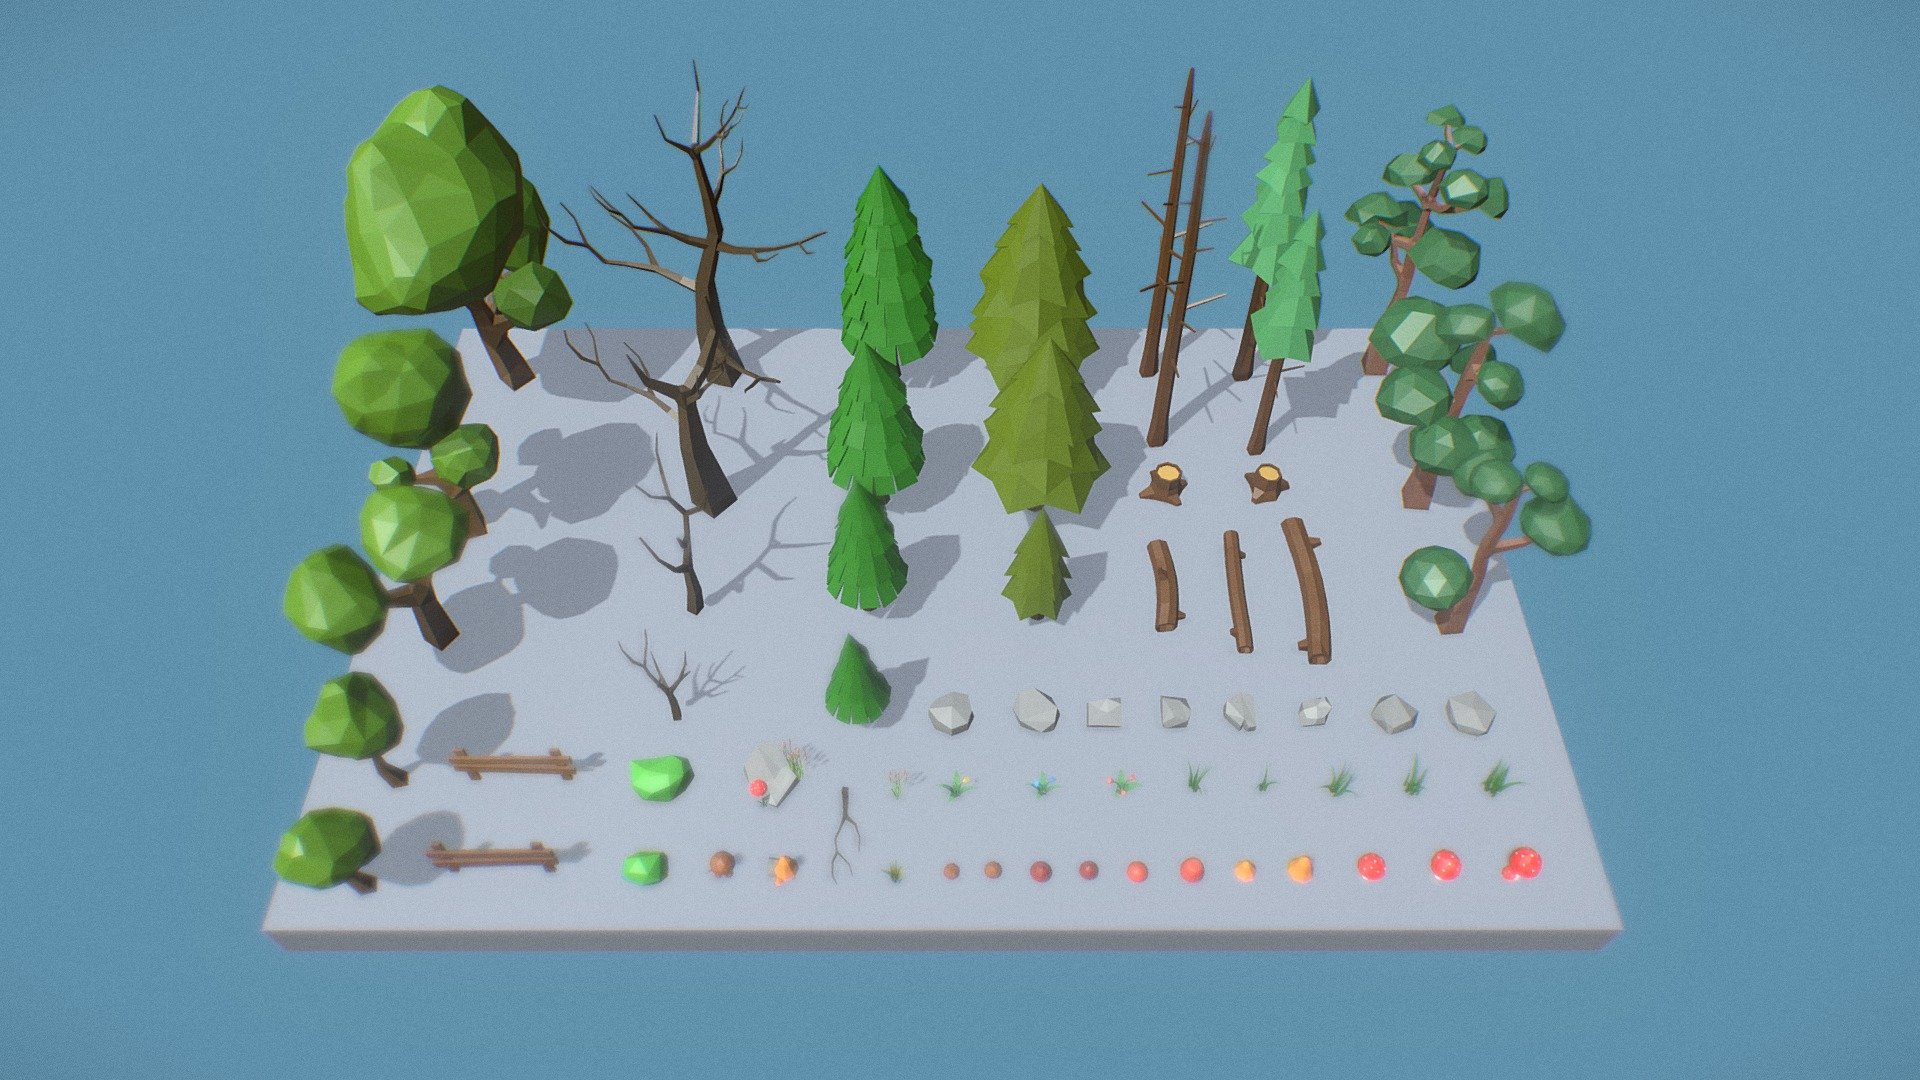 Low poly assets pack, ready for games. 
This low poly pack has everything you need to create cool nature scene.

Follow the link below to buy this pack:
http://bit.ly/35cJbYg

Models:
- 23 Trees; 
- 11 Mushroom;
- 10 Grass; 
- 8 Rocks;

- 13 Other Elements.

Additional formats: fbx, obj, blend, mb

Thanks :) - Low Poly Trees Grass and Rocks - 3D model by olehlila 3d model